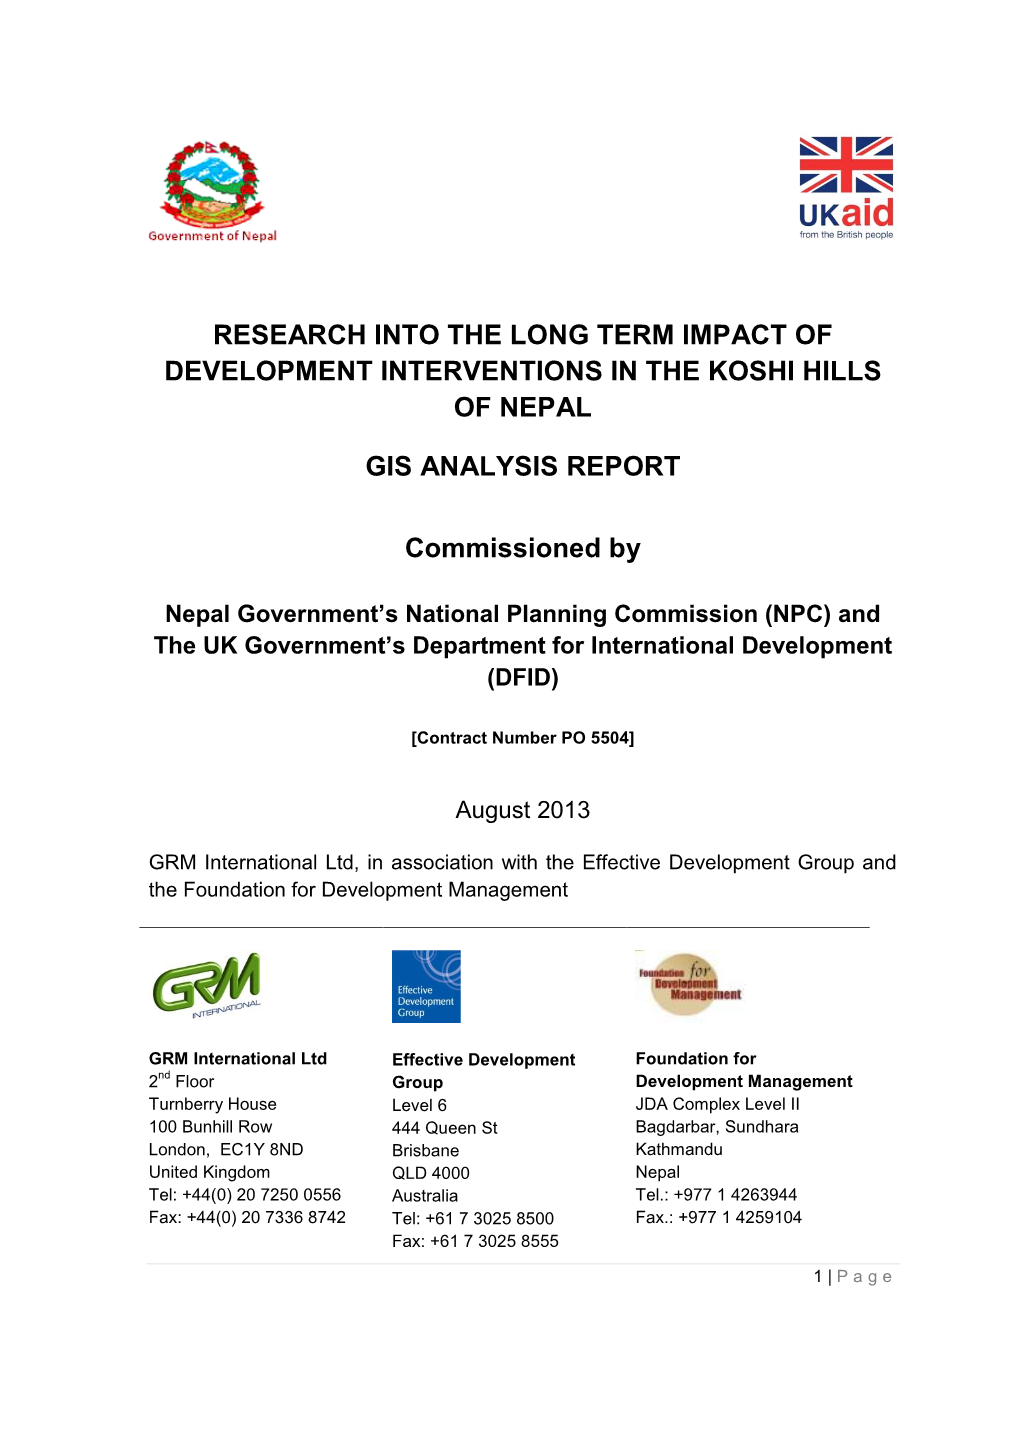 Research Into the Long Term Impact of Development Interventions in the Koshi Hills of Nepal